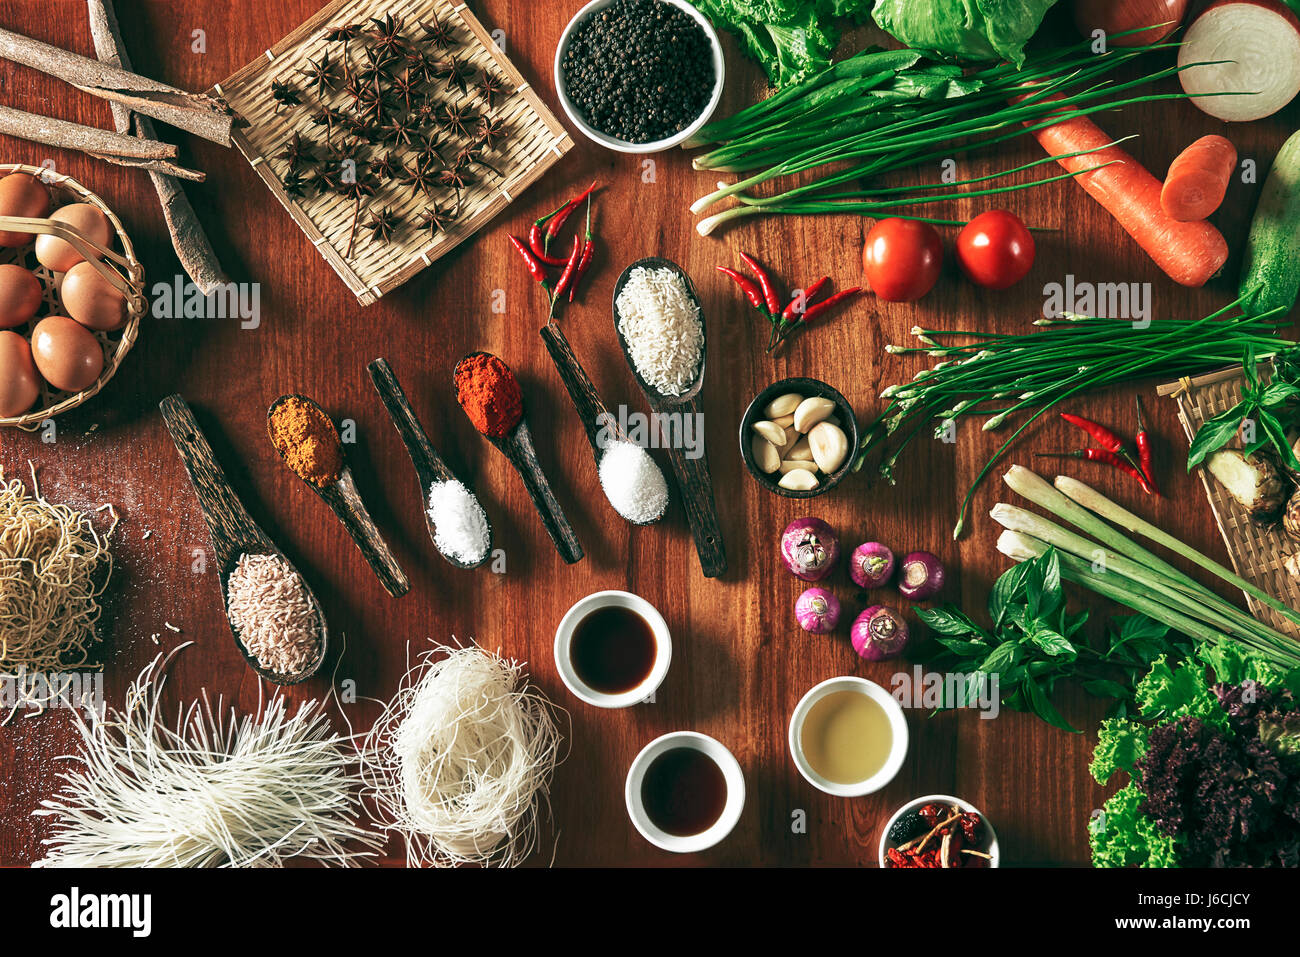 top-view of vegetables, spices, and ingredients Stock Photo